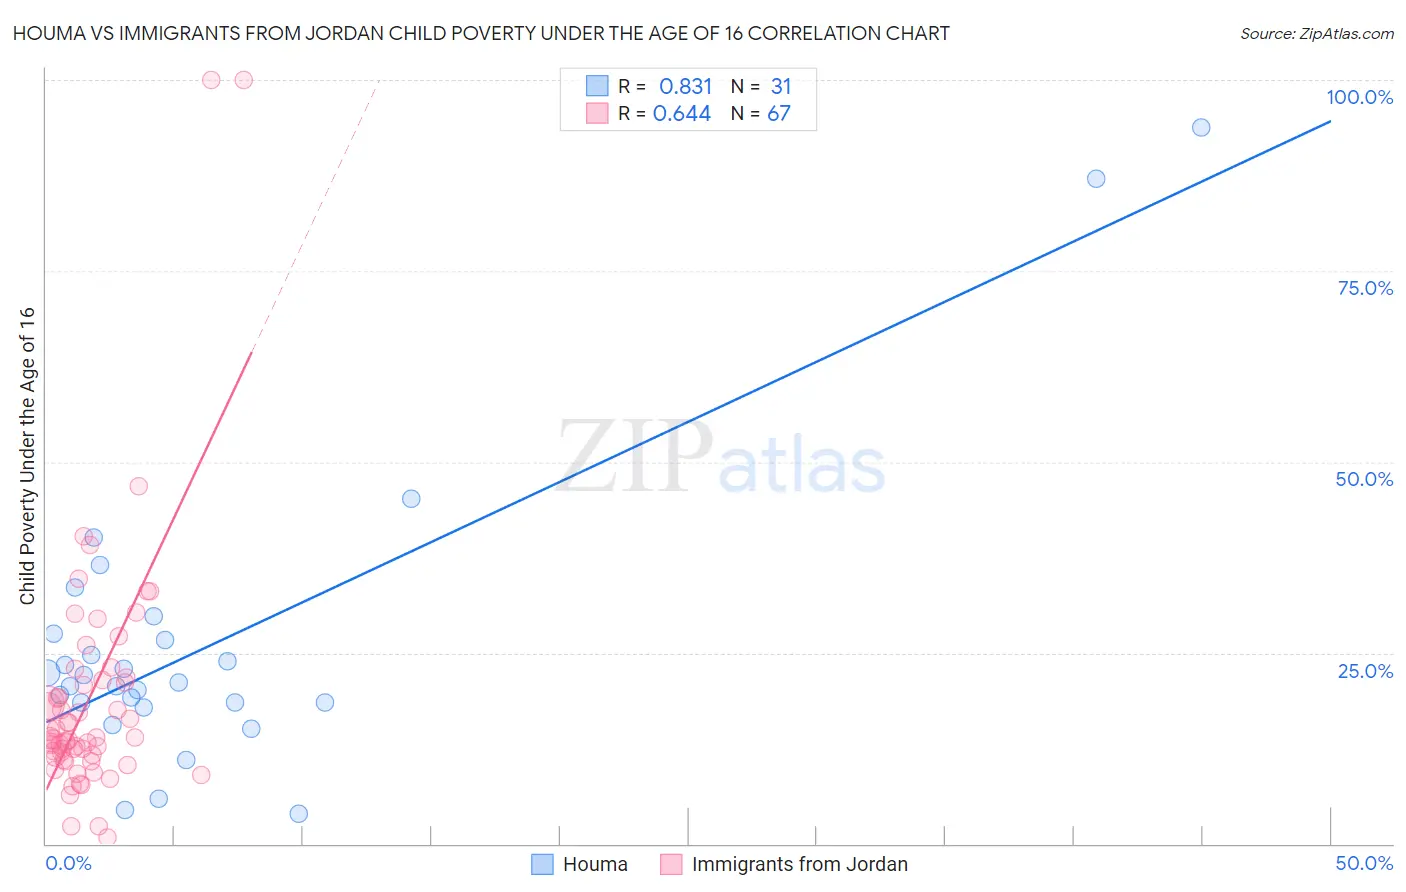 Houma vs Immigrants from Jordan Child Poverty Under the Age of 16